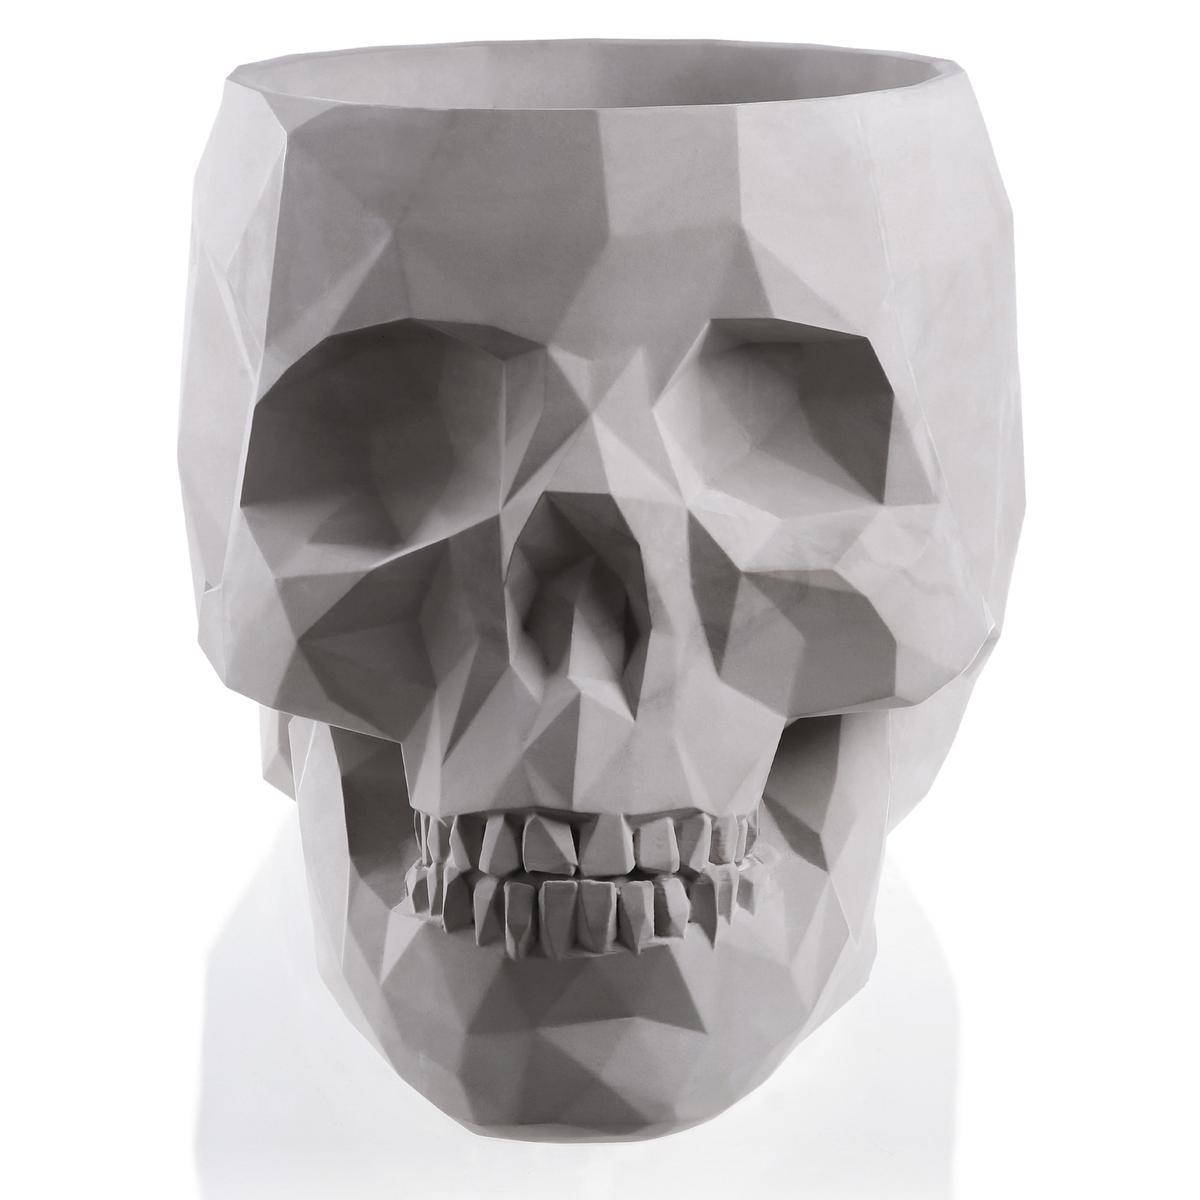 Donica Skull Low-Poly Unpainted 24 cm nr. 1